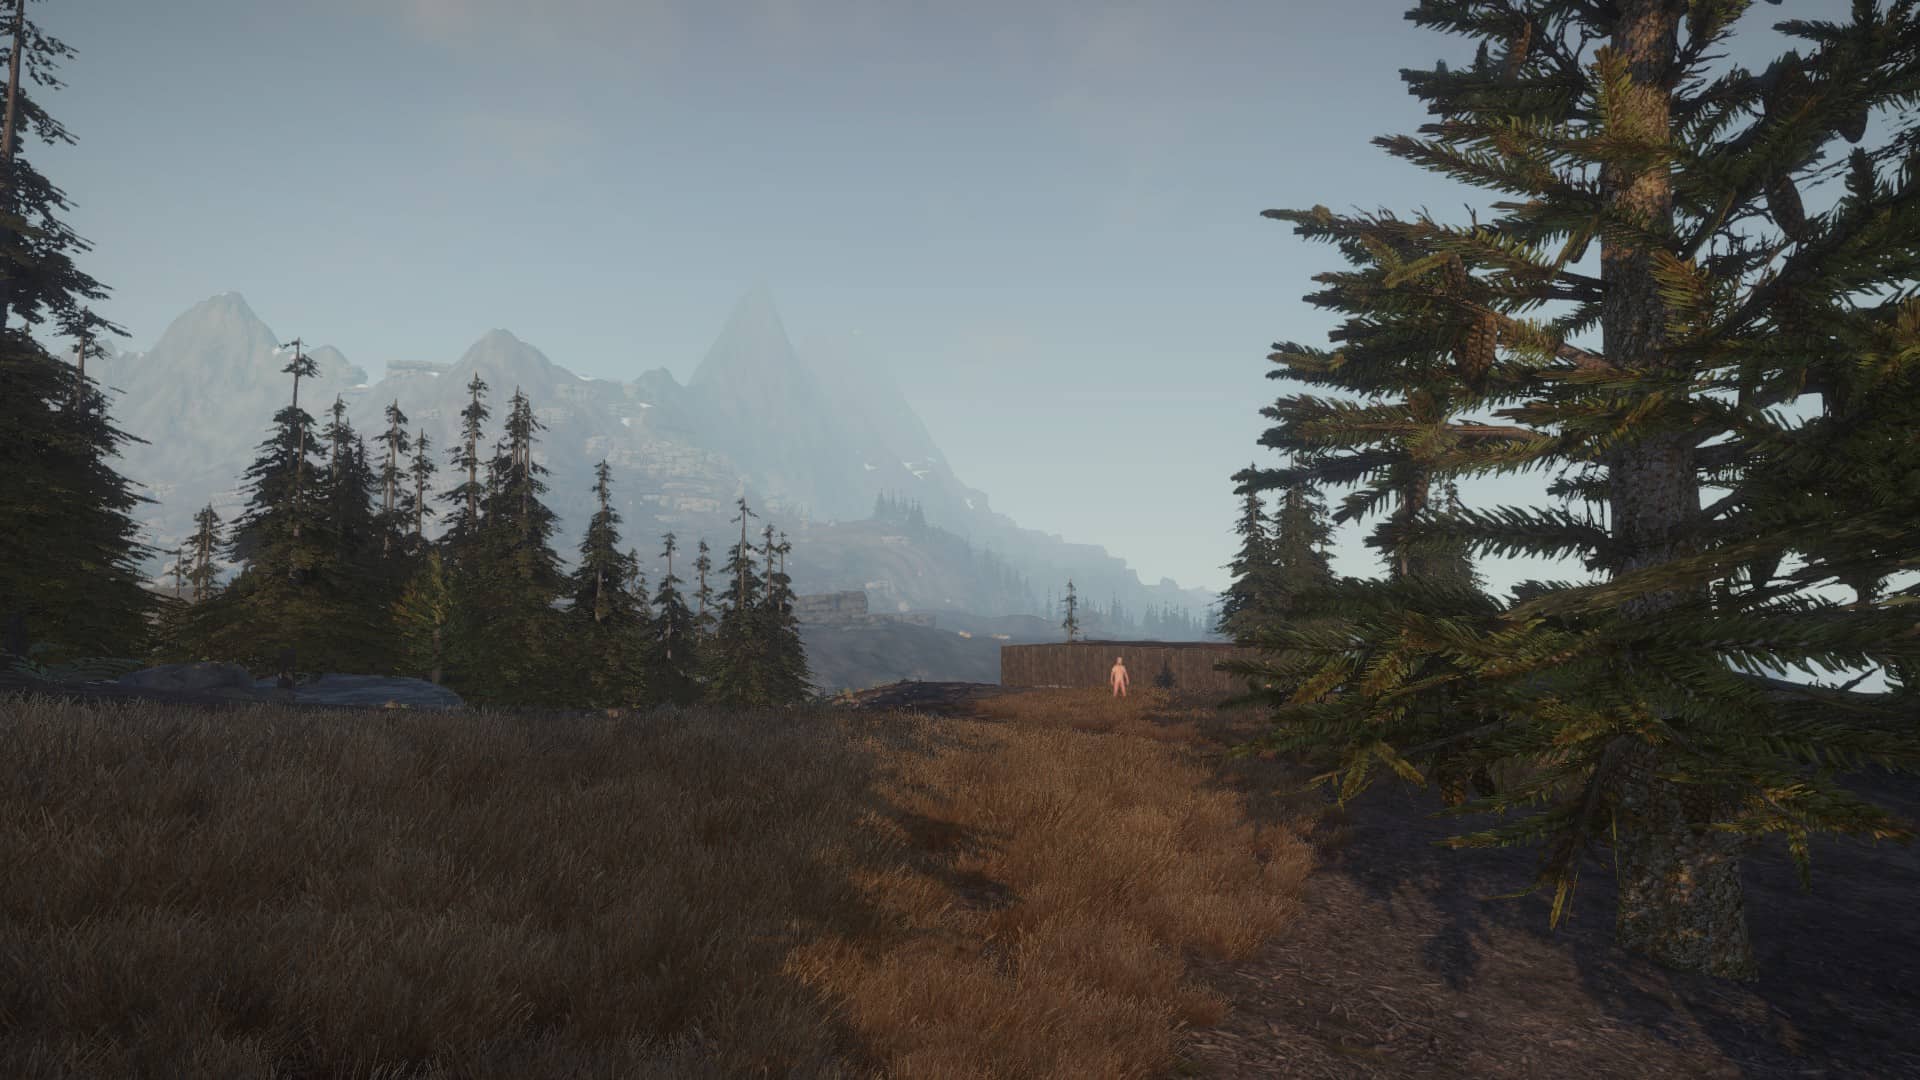 rust pc download free